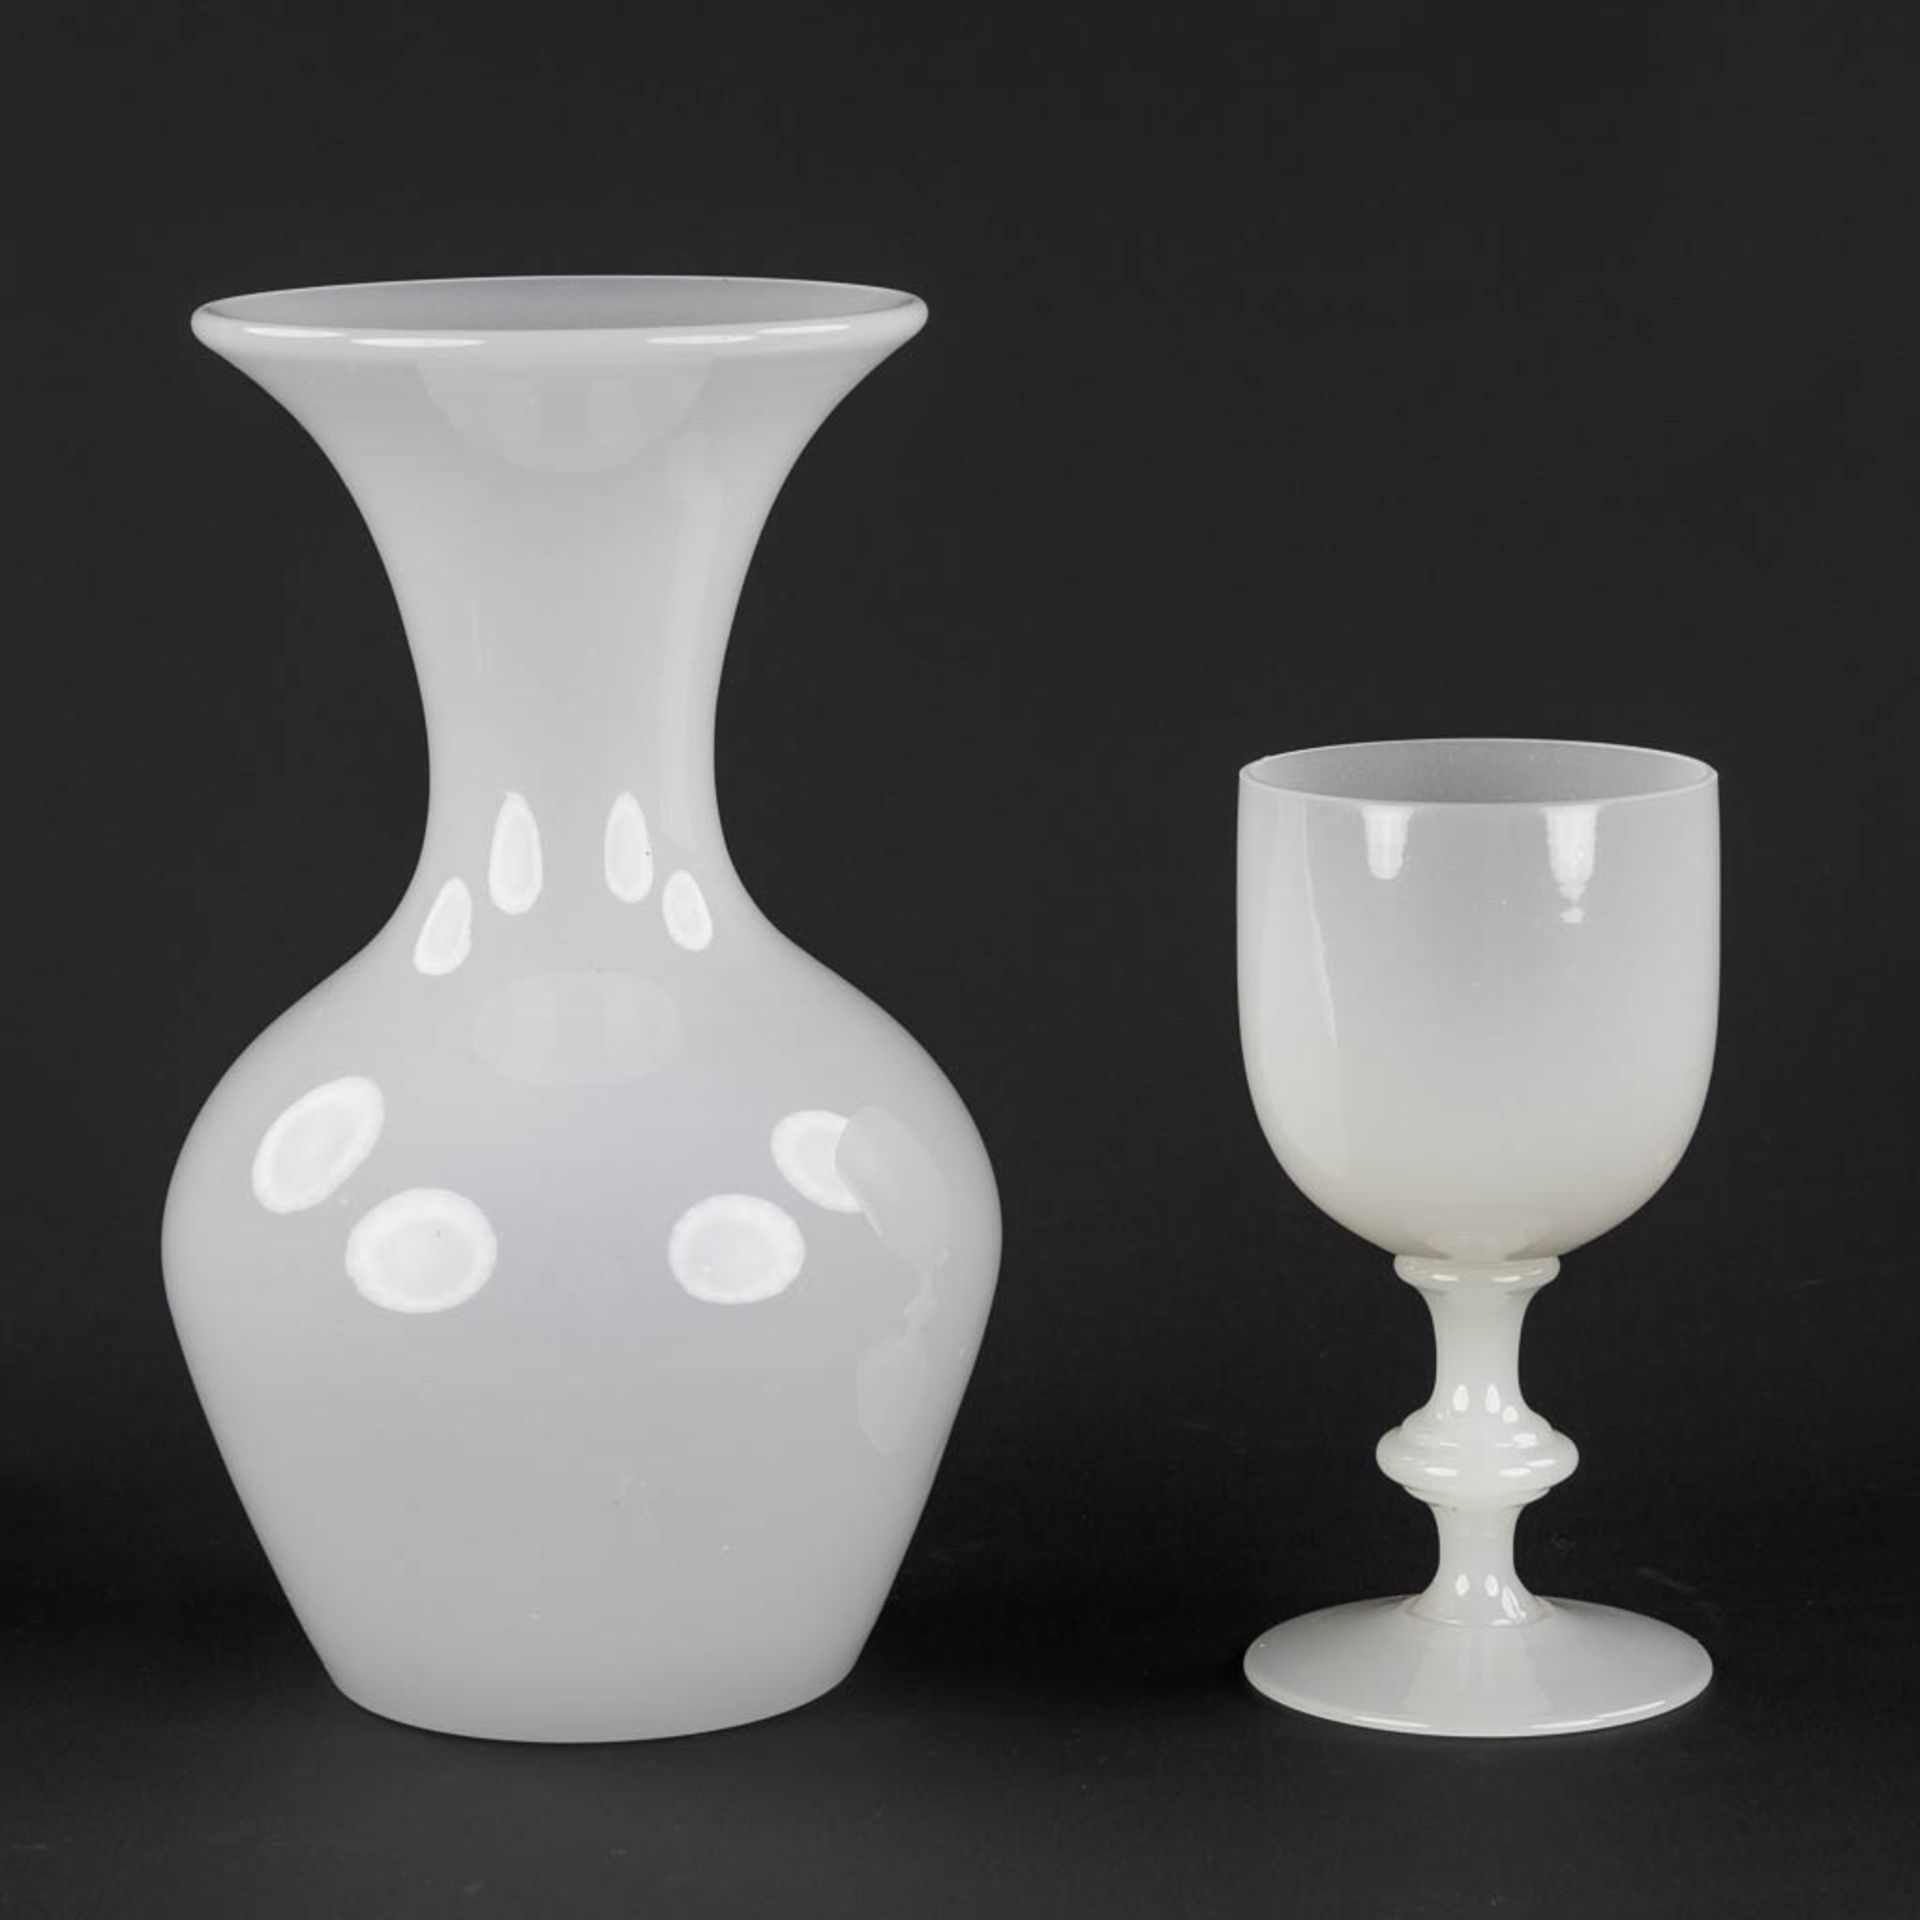 A vase and a chalice, white opaline glass. (H:25 x D:14 cm) - Image 3 of 8